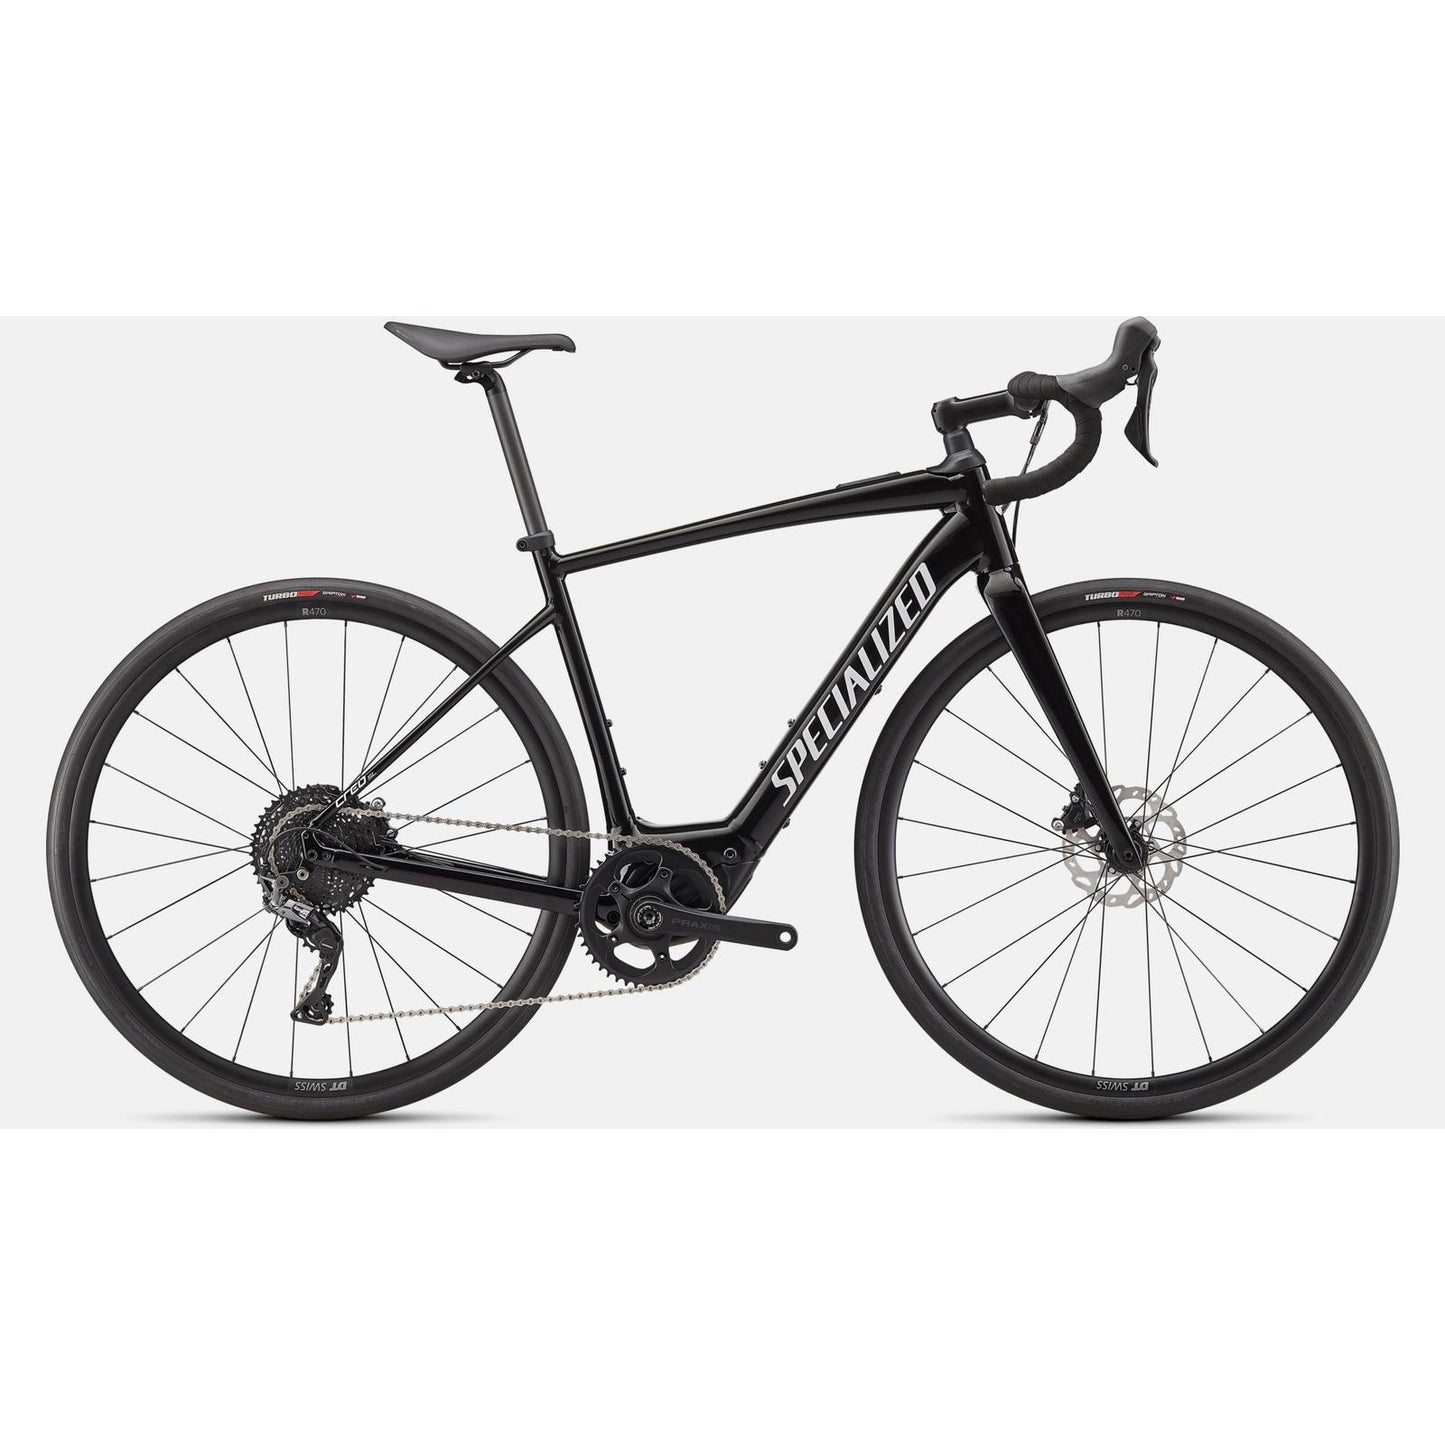 Specialized Turbo Creo SL Comp E5 Electric Road Bike - Bikes - Bicycle Warehouse